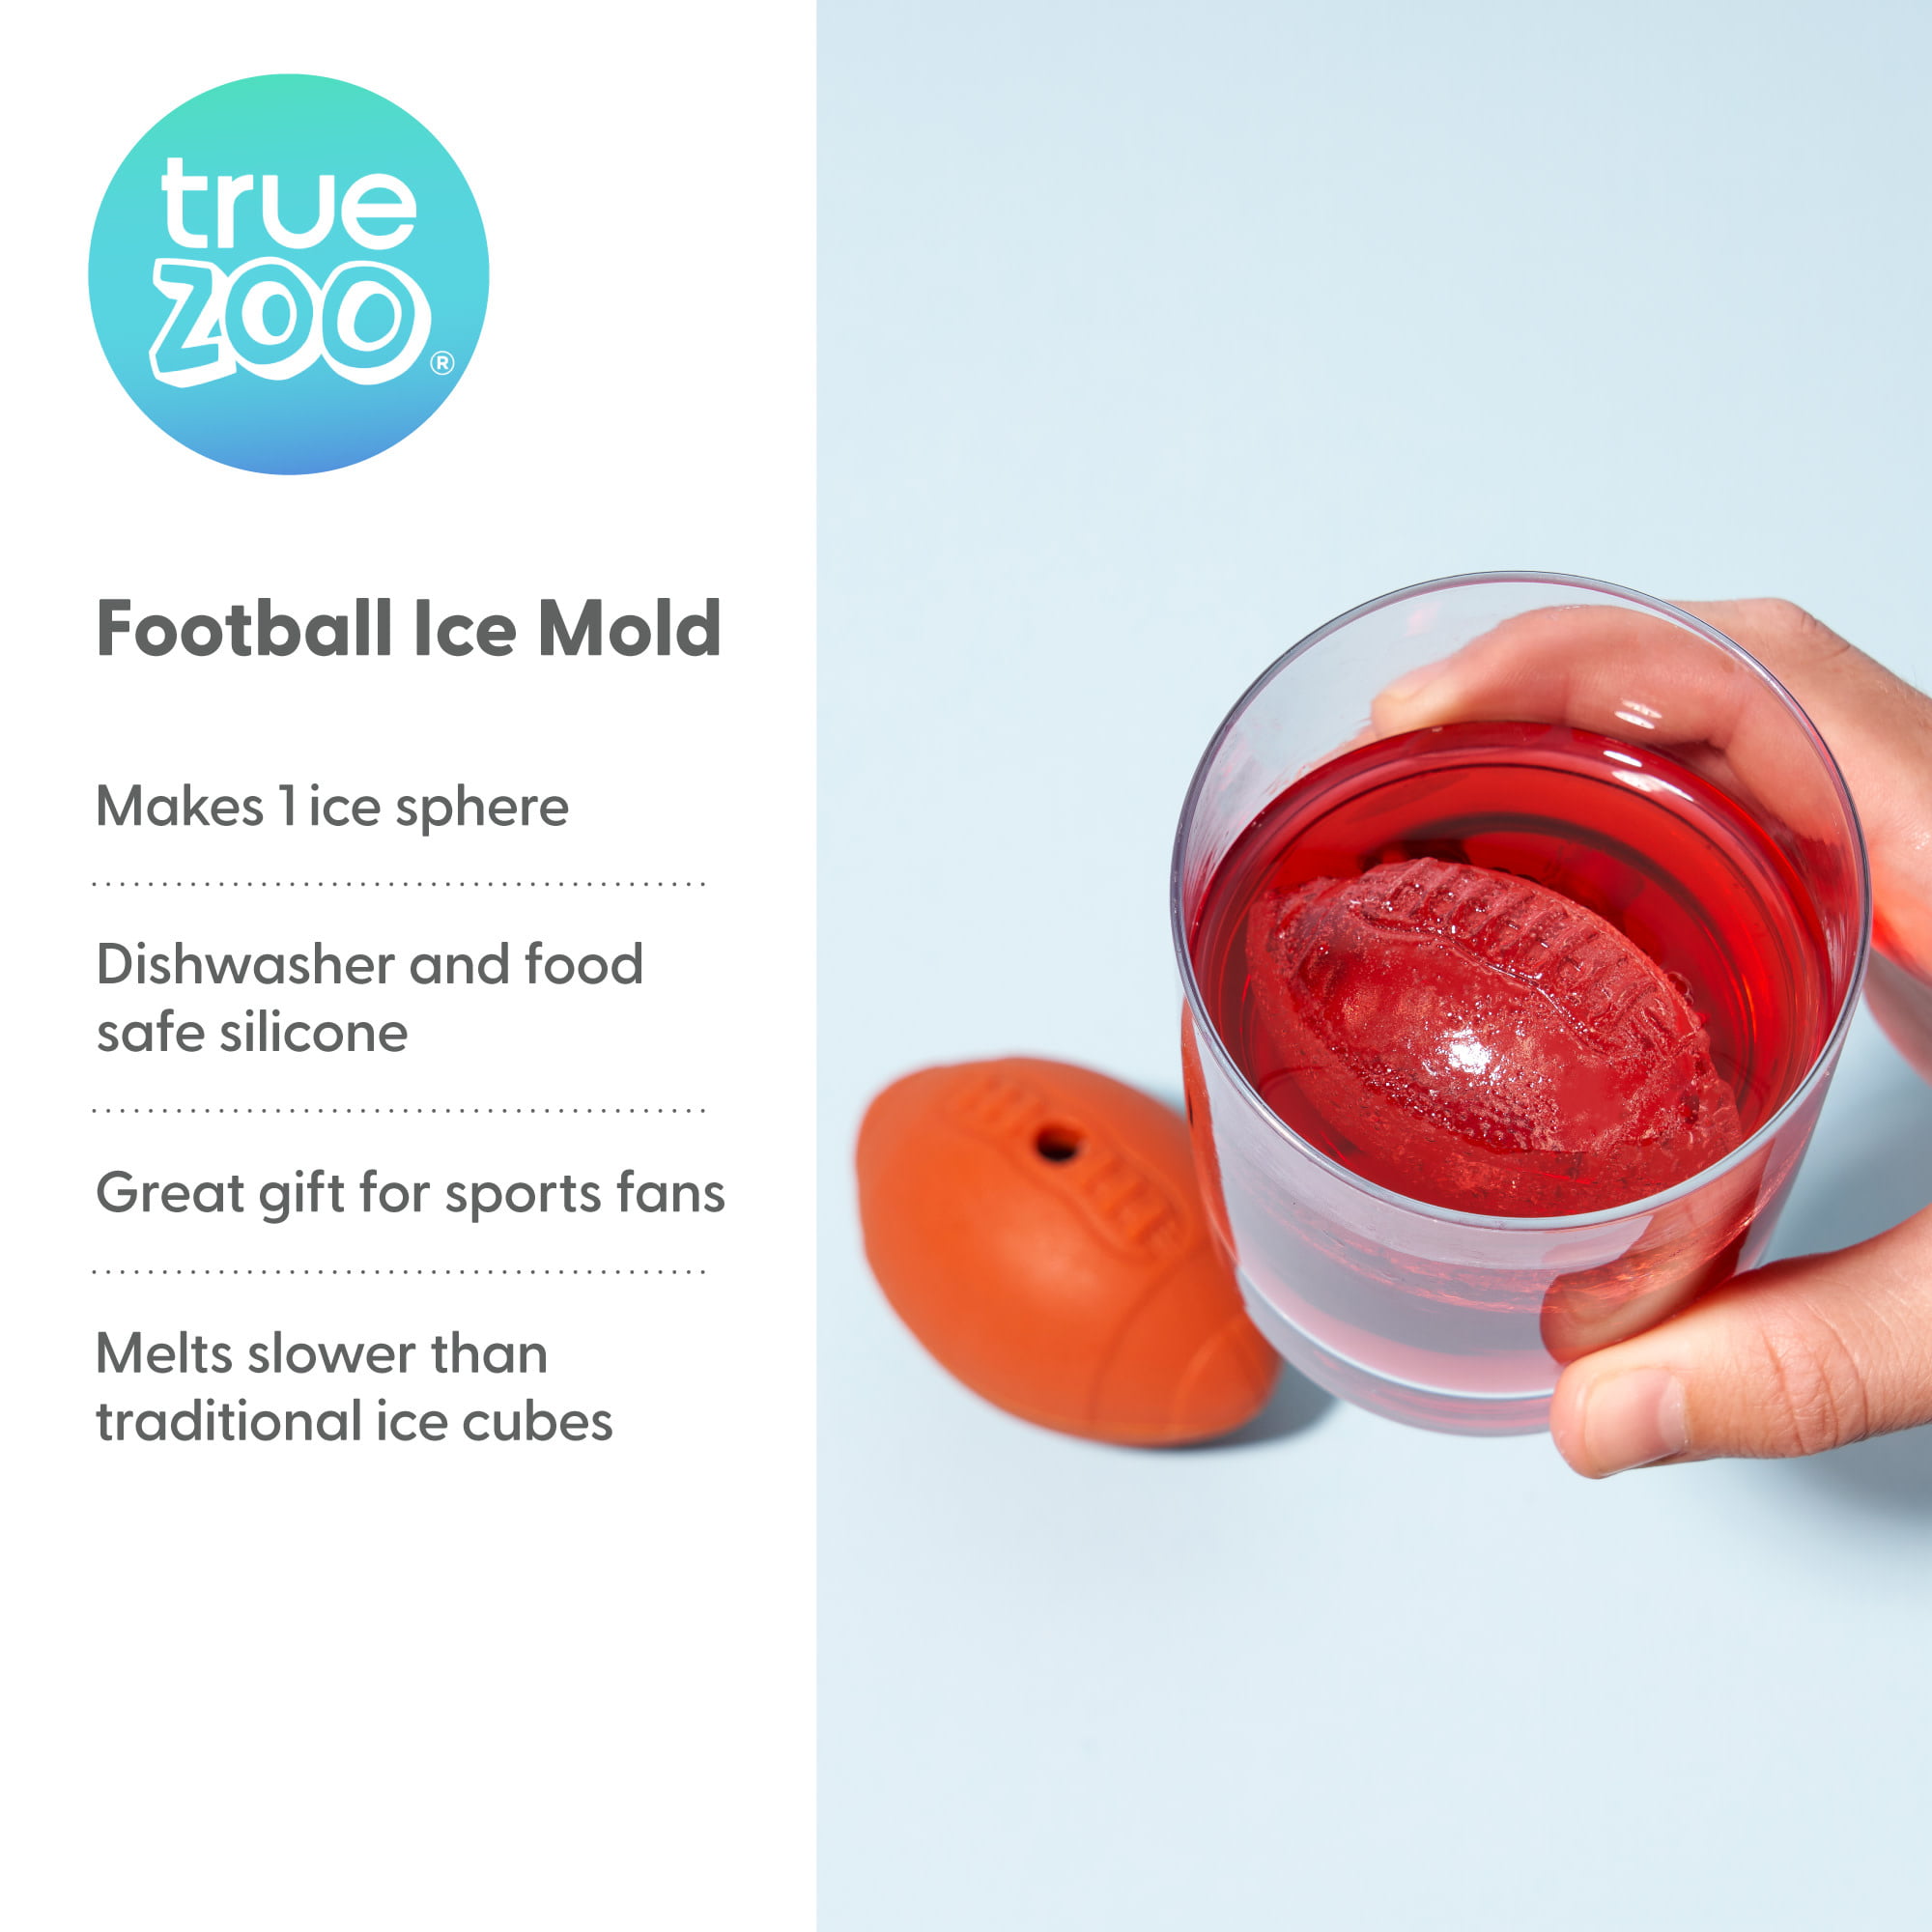 Dashing Novelty Gift Silicone Ice Cube Mold Maker Sport Football 2